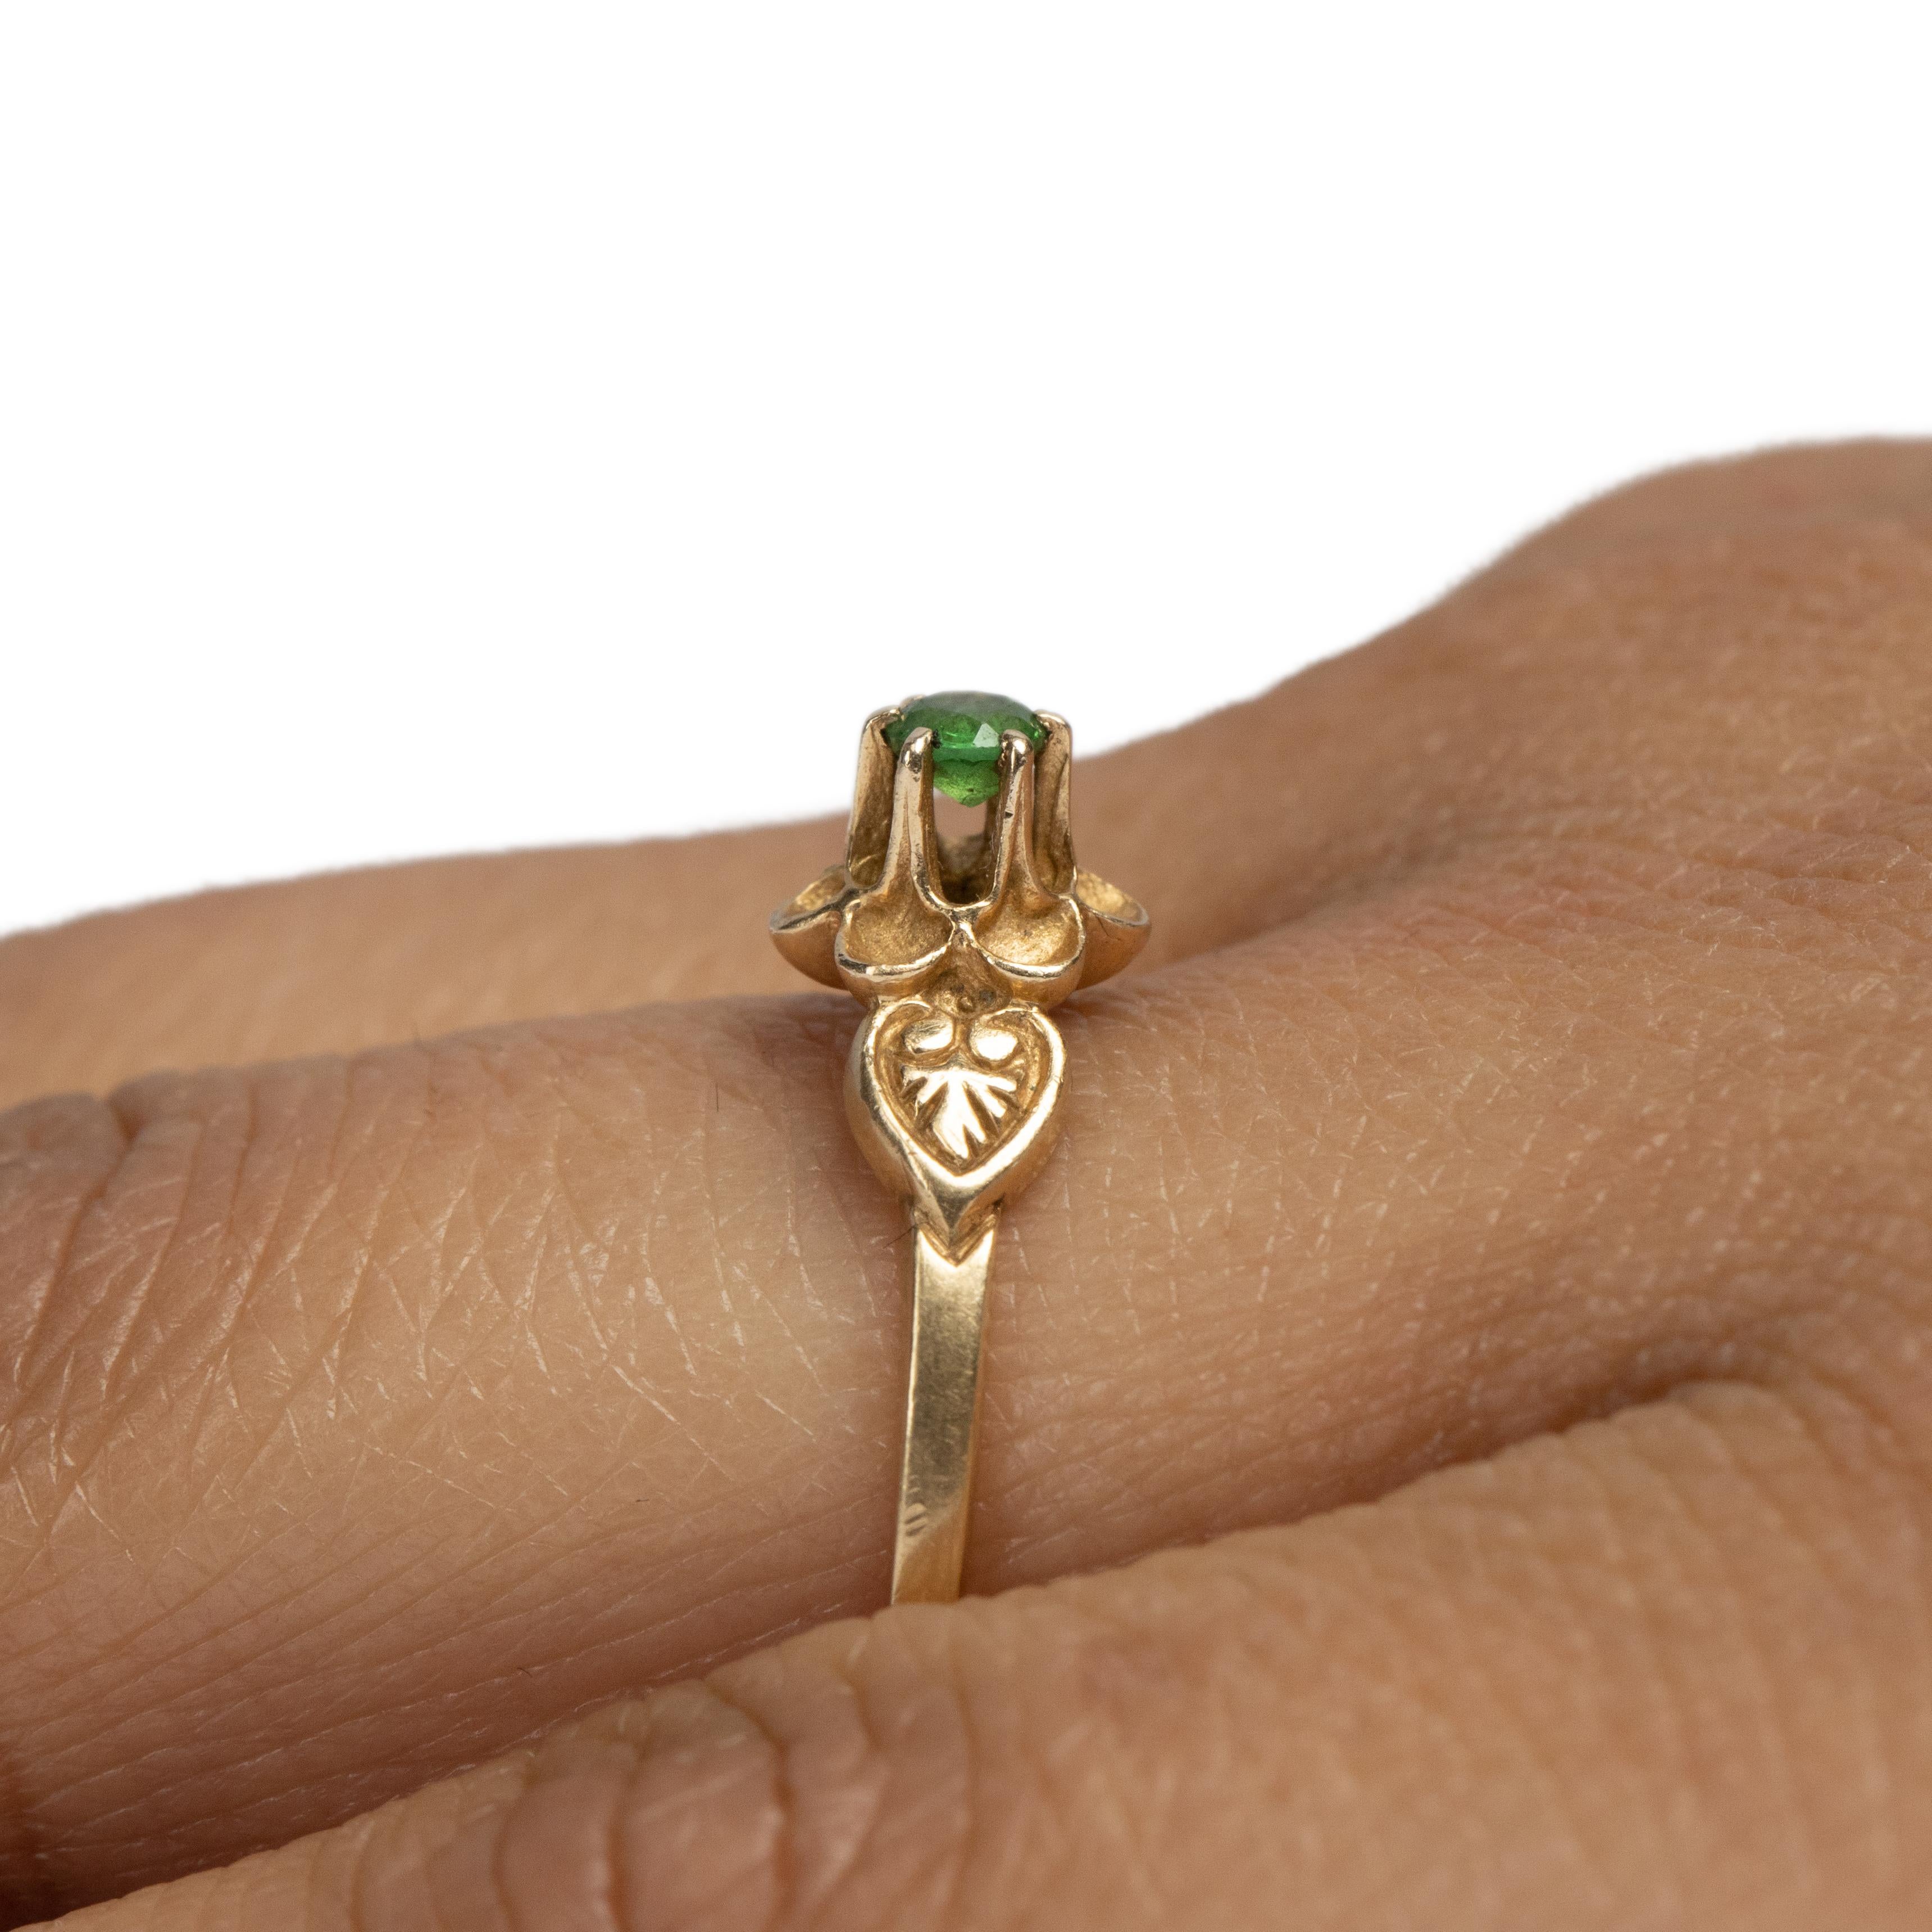 Art Deco 14K Yellow Gold Floral Vintage Ring with Leaf Carving and Emerald Ring 2